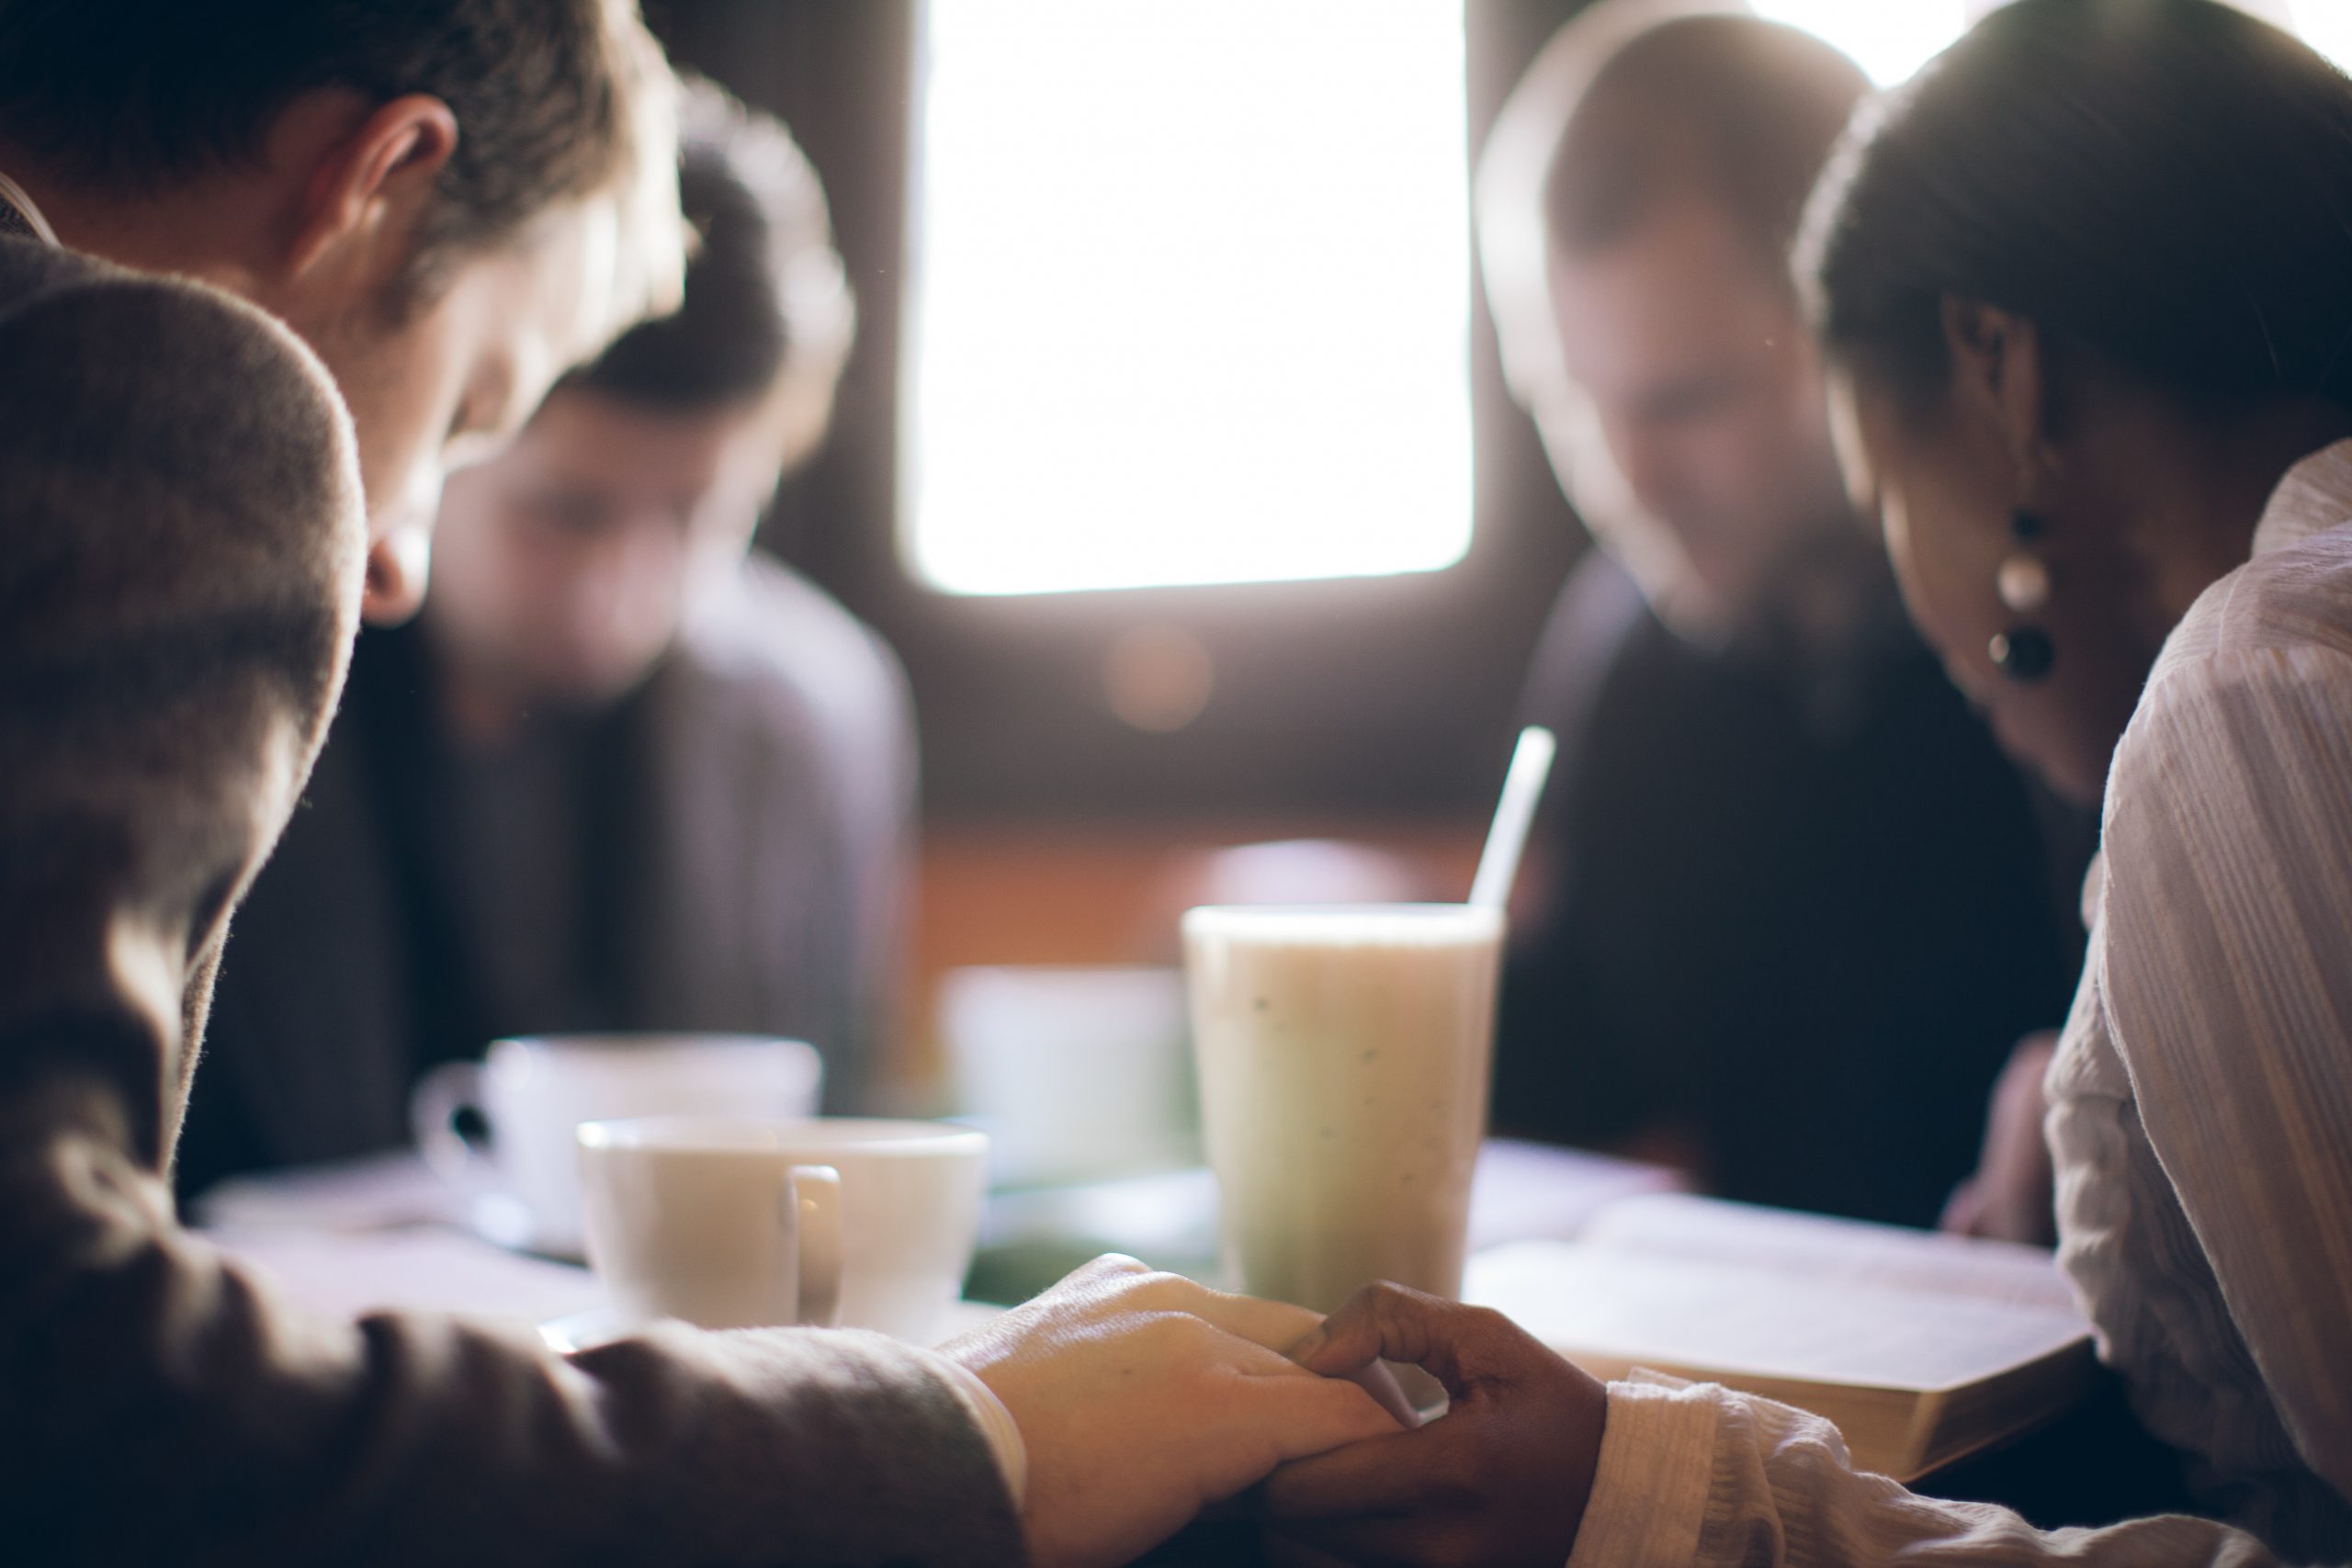 blurred image of four adults gathering in prayer around a table with beverages